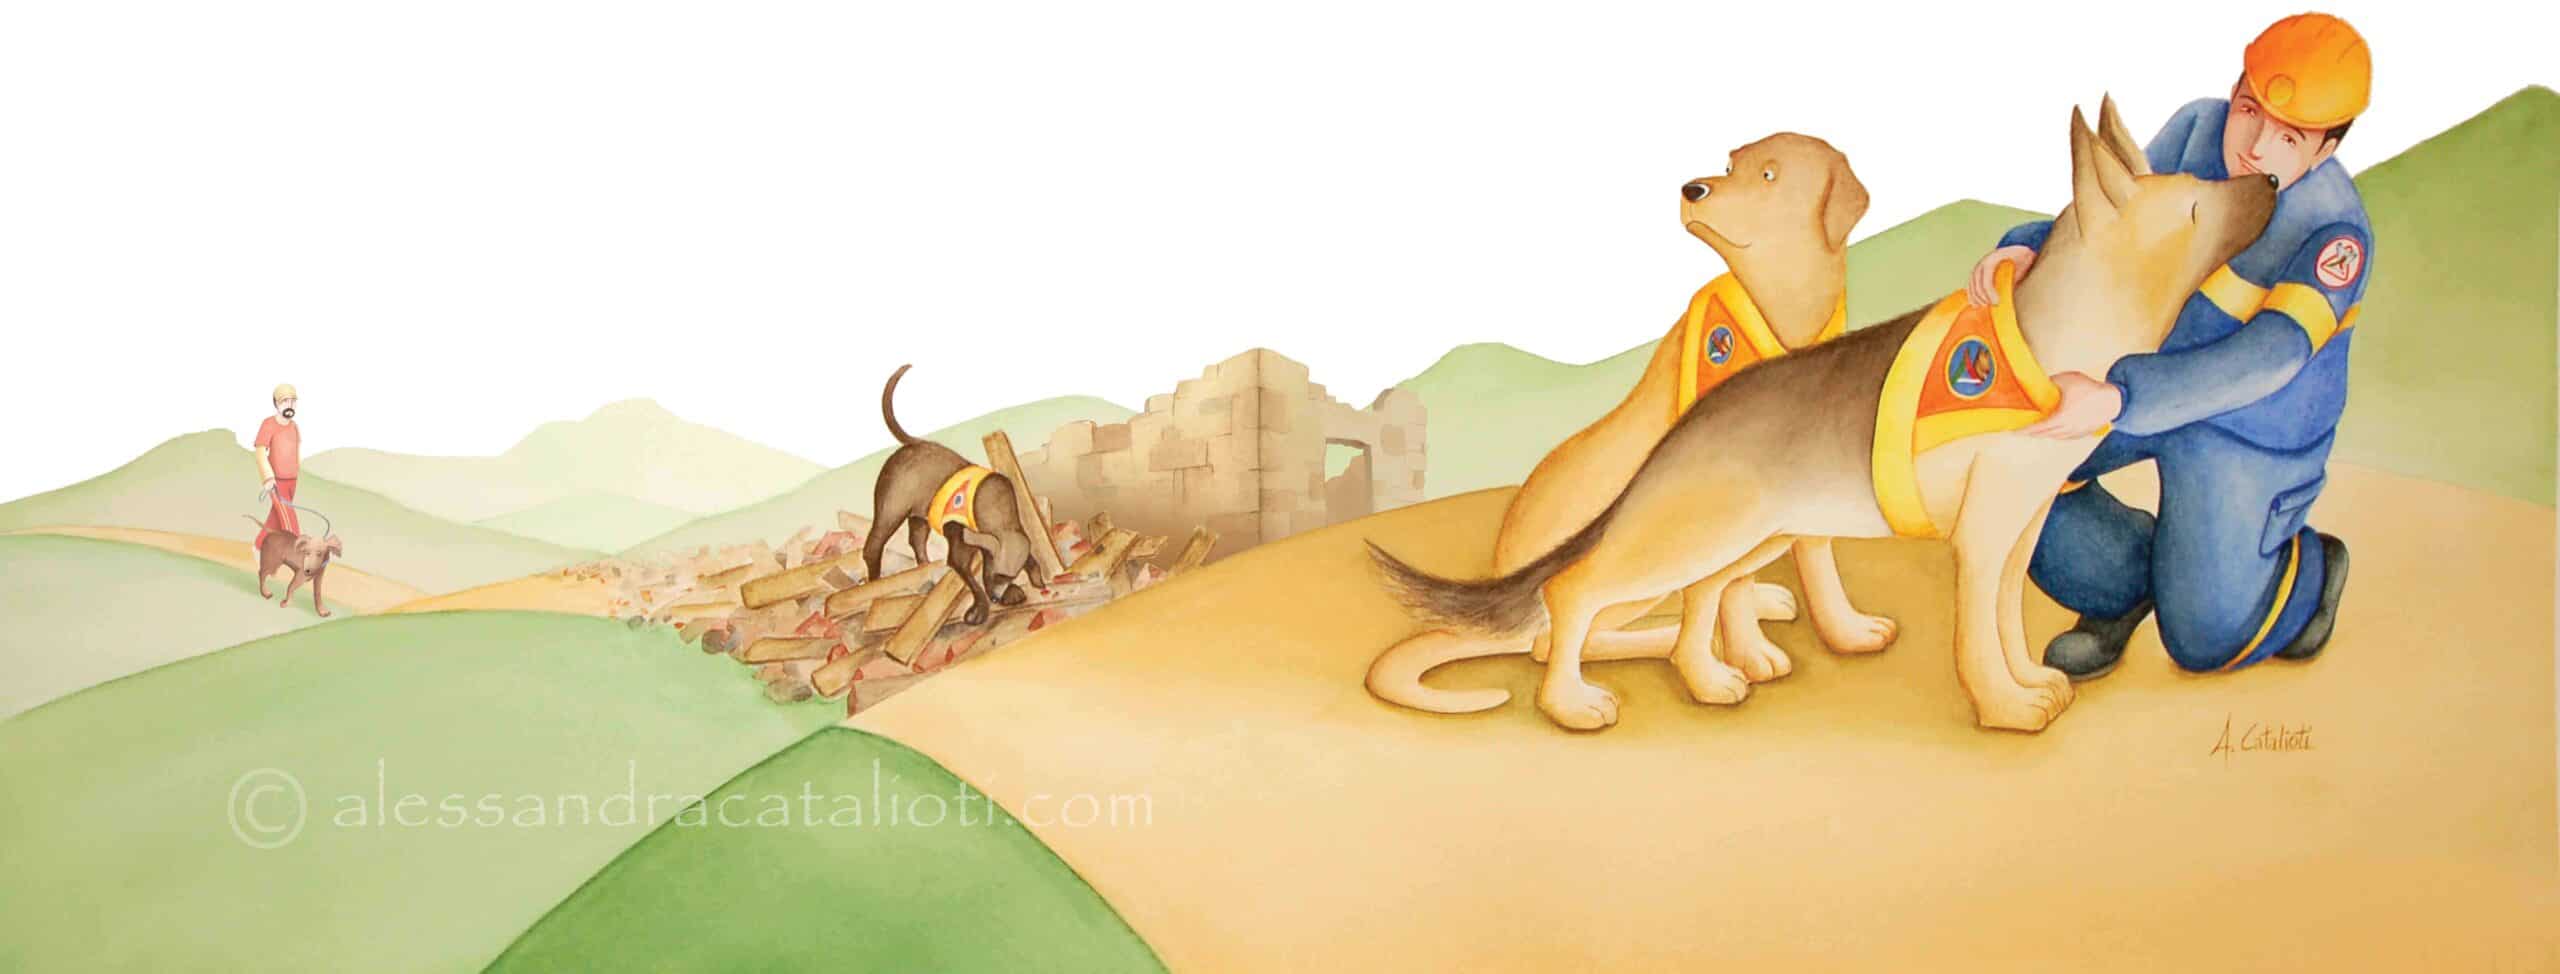 An advertising illustration to represent the activities done in the kennel club